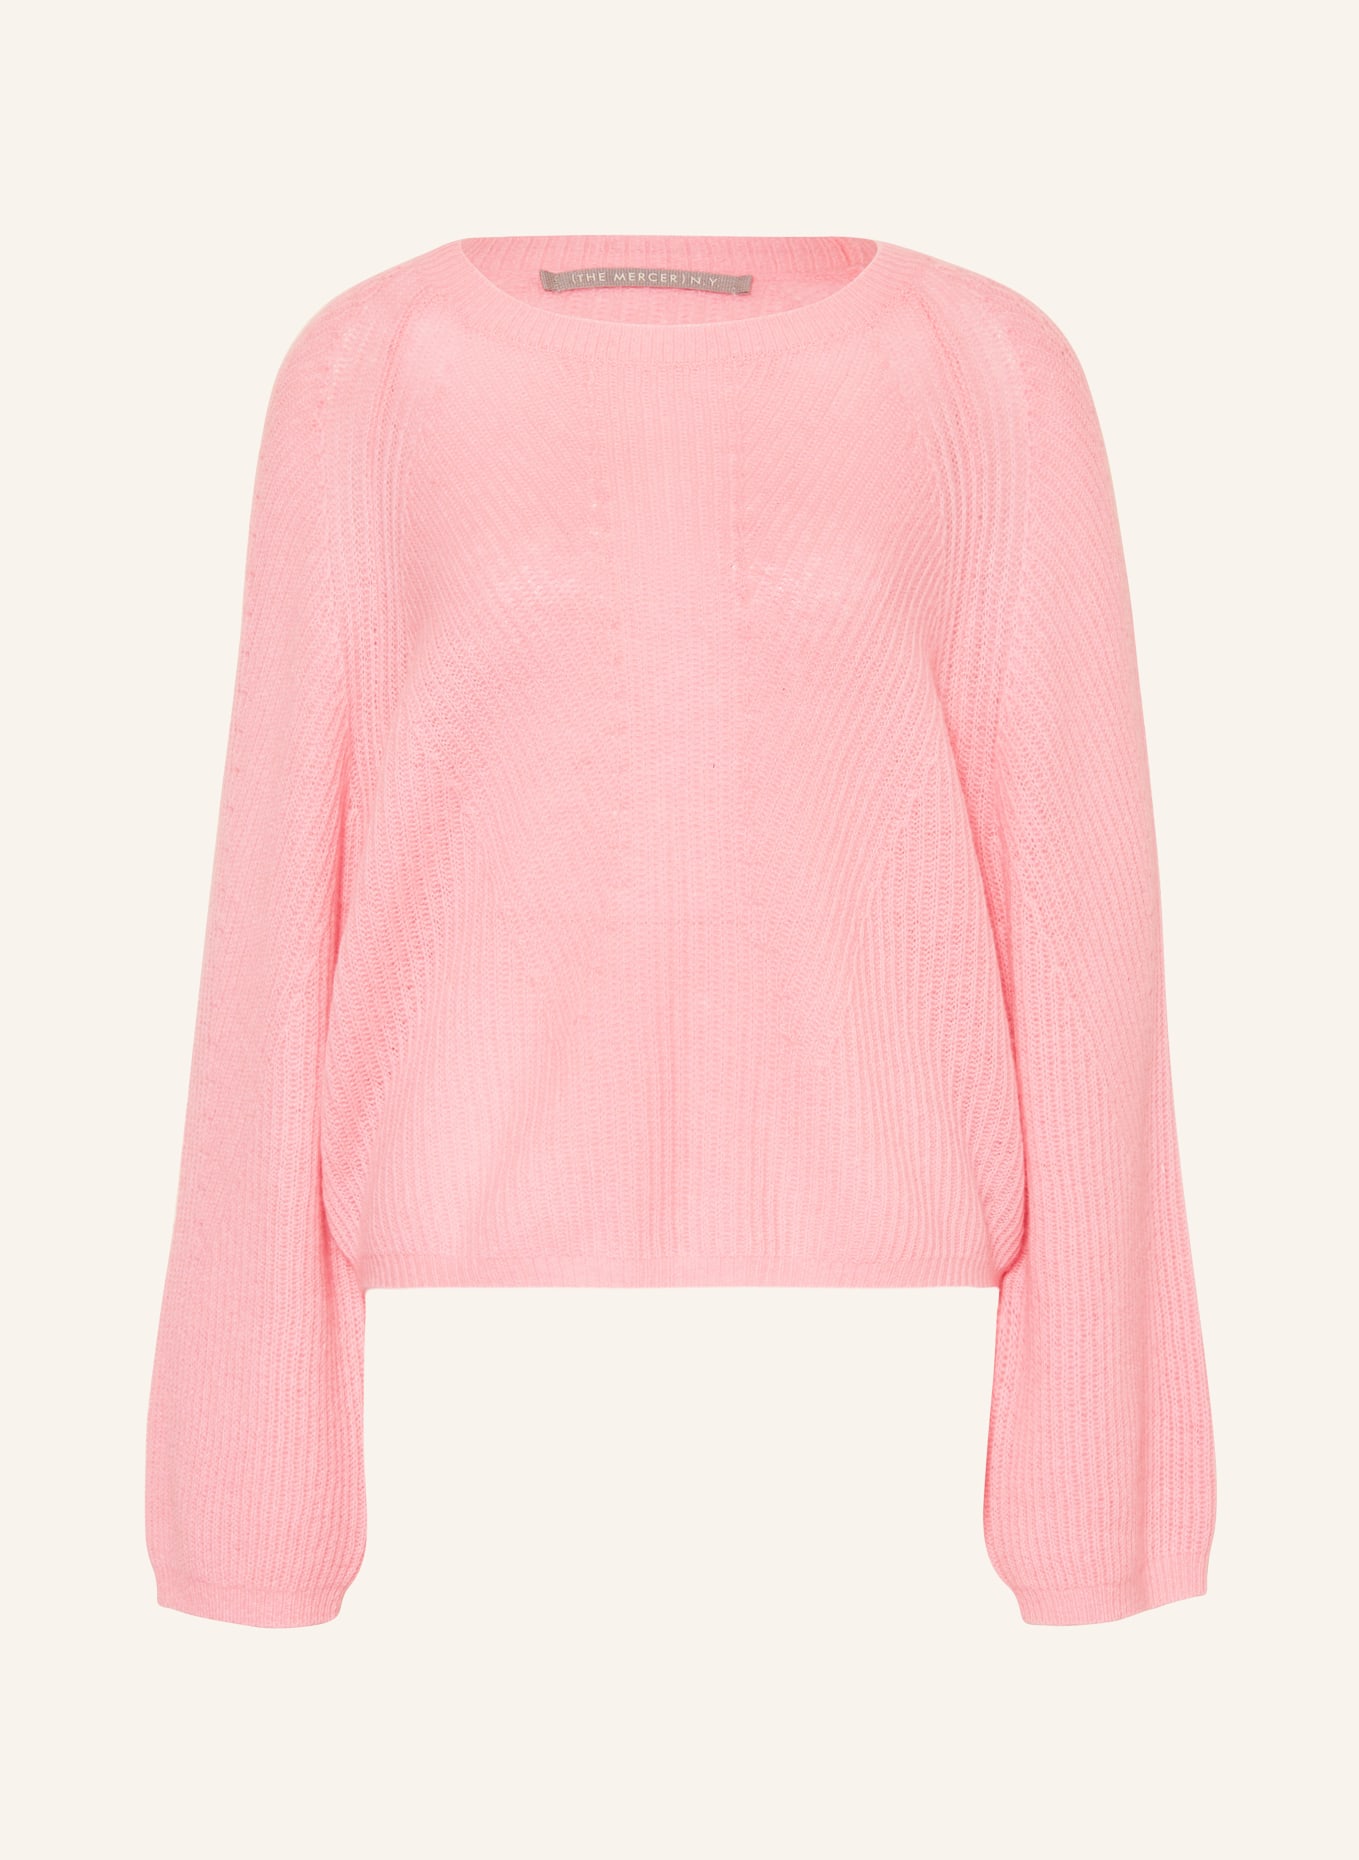 (THE MERCER) N.Y. Cashmere-Pullover, Farbe: PINK (Bild 1)